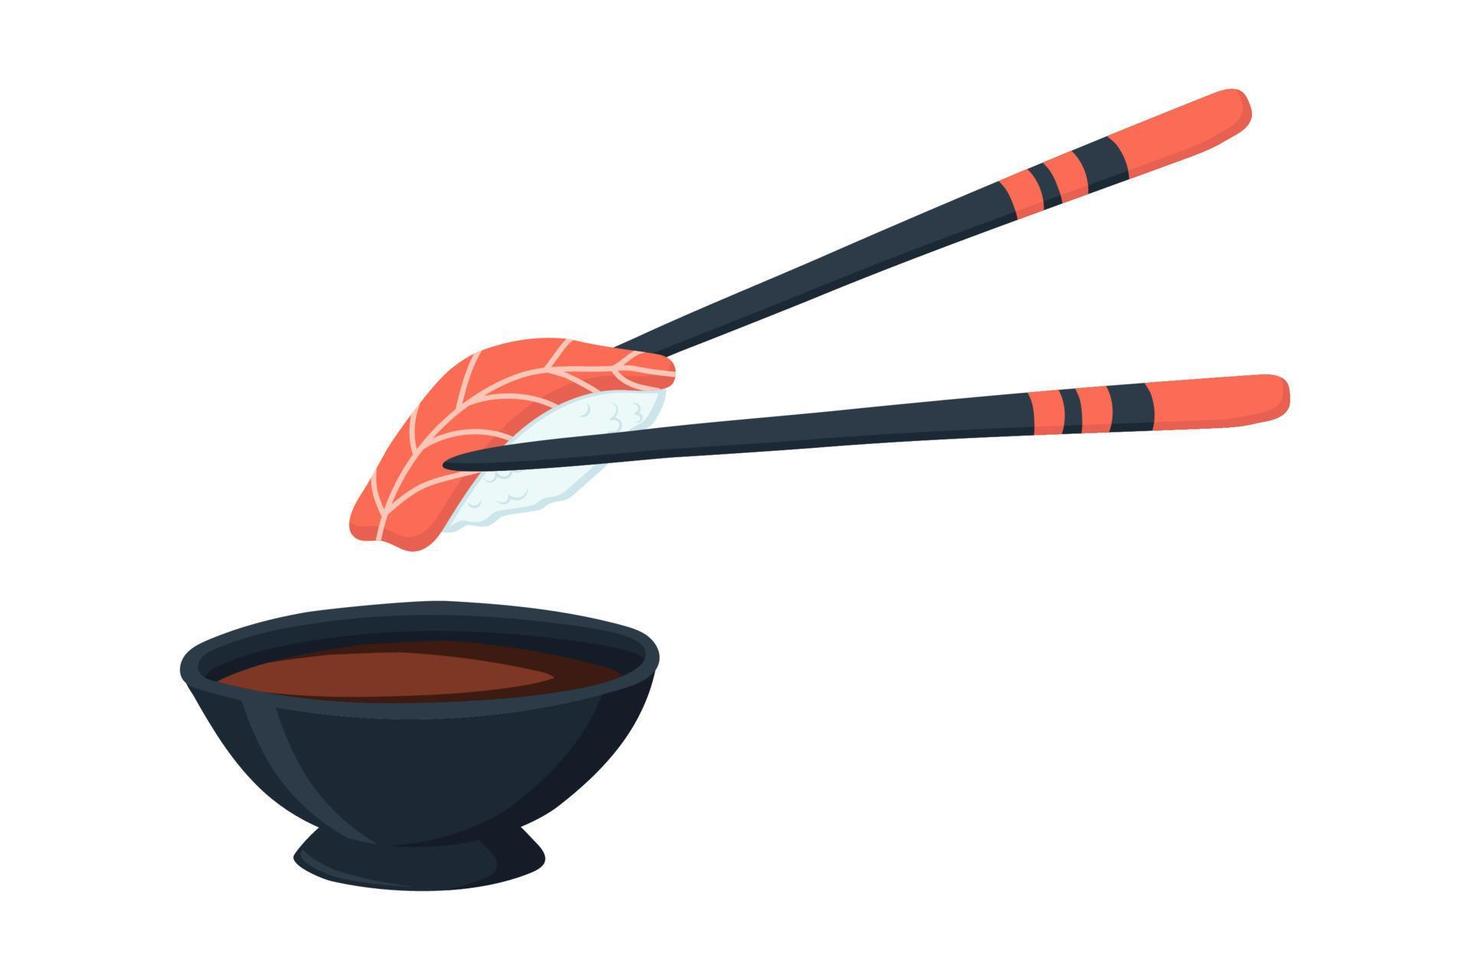 Keep sushi with chopsticks and dip in soy sauce. vector illustration